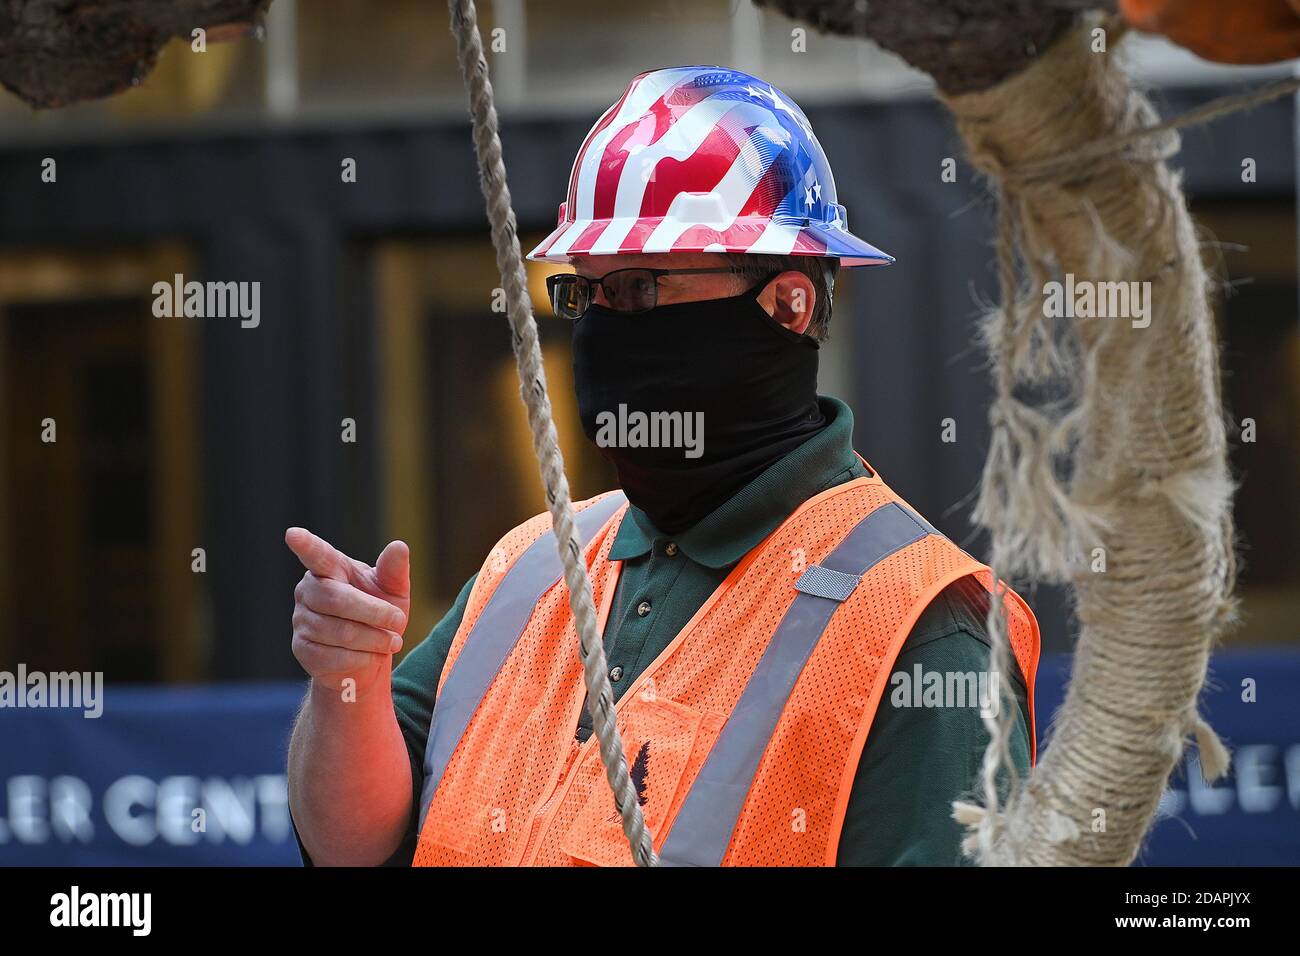 New York City, USA. 14th Nov, 2020. Erik Pauze, head garden at Rockefeller Center, leads riggers in the placement of cable as they prepare to place the 2020 Rockefeller Center Christmas tree onto its platform at Rockefeller Center in New York, NY, November 14, 2020. The 75-foot tall tree is a Norway Spruce that was acquired in Oneonta, N.Y. (Anthony Behar/Sipa USA) Credit: Sipa USA/Alamy Live News Stock Photo